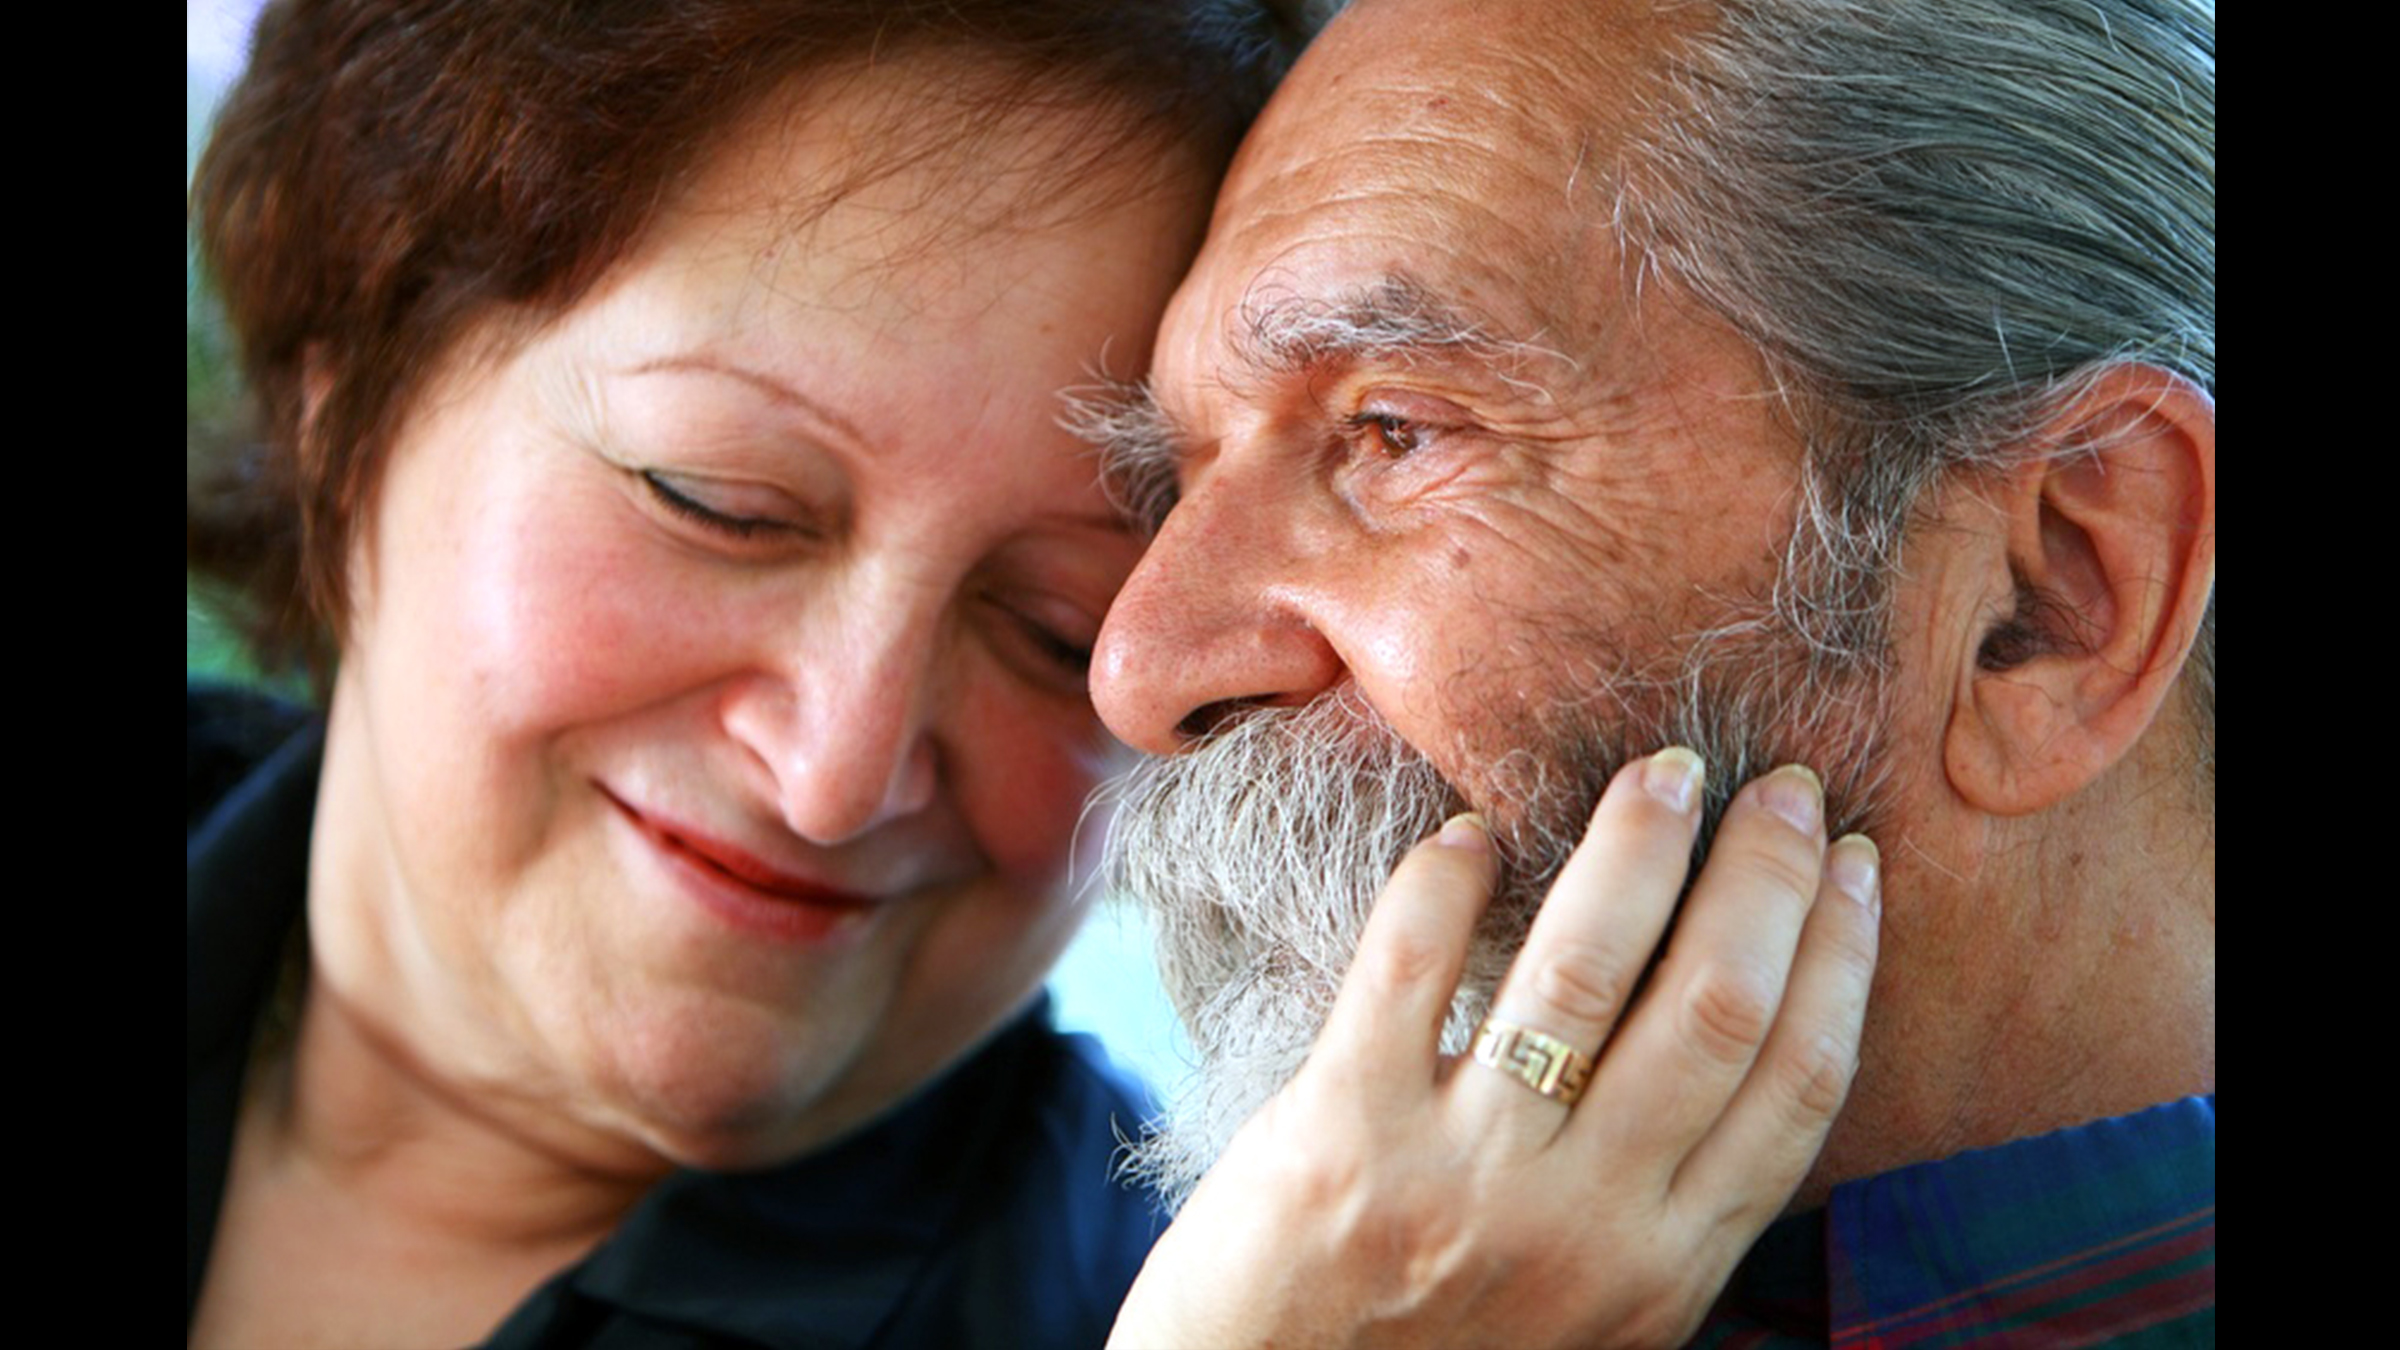 Older couple, the woman's hand rests on the cheek of the man, both look content